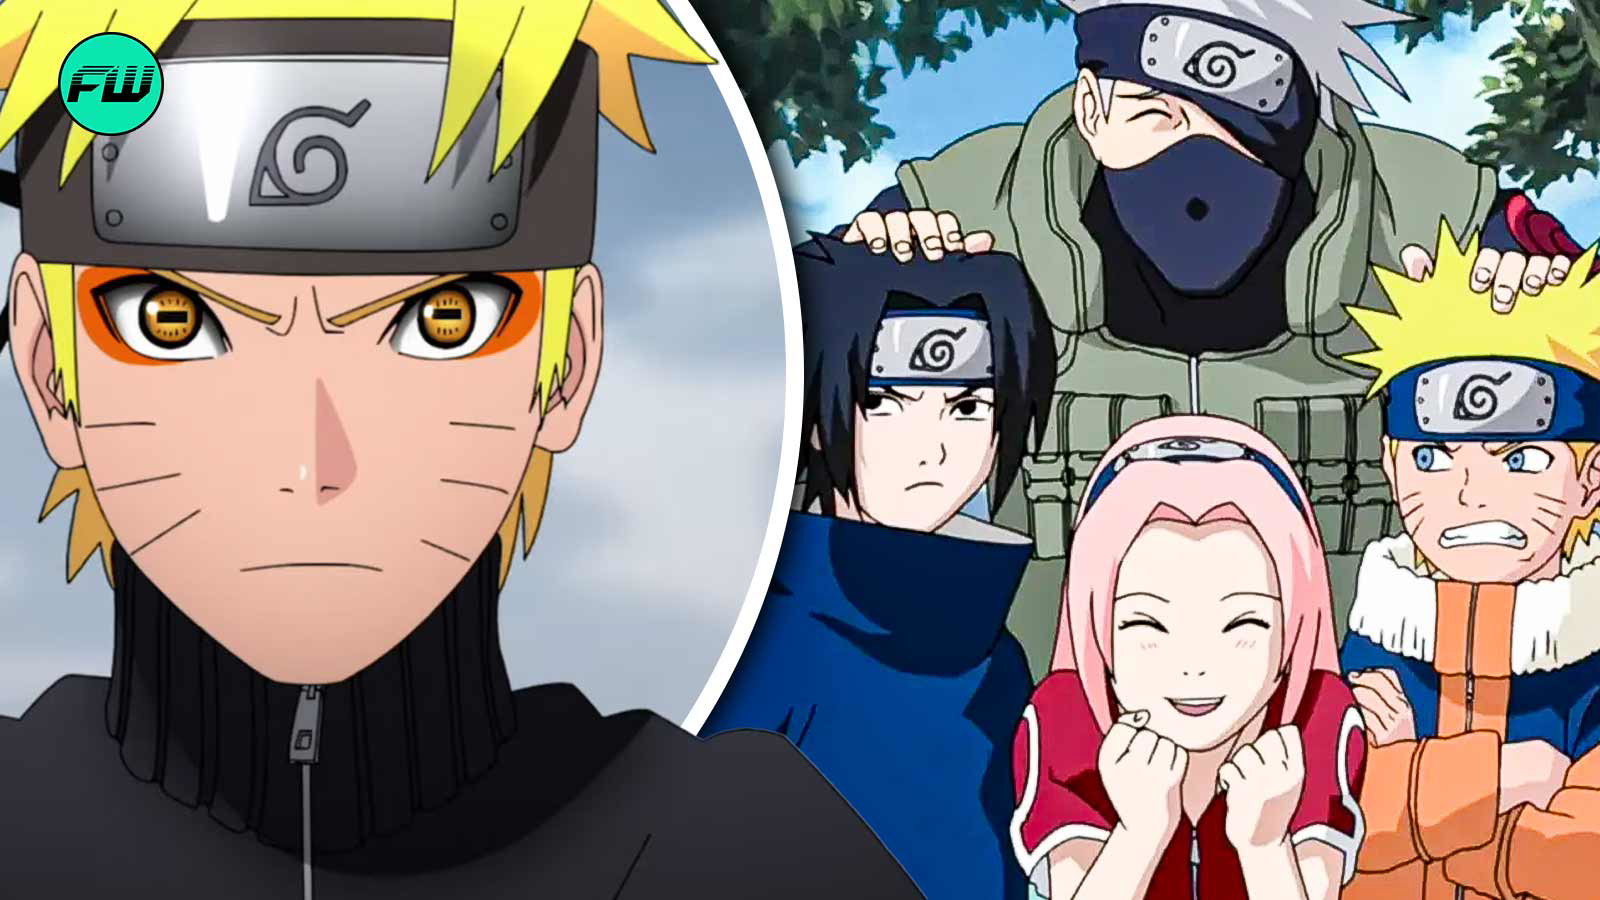 “I didn’t want people to know where the story takes place”: Masashi Kishimoto Went Above and Beyond to Make Sure Naruto Never Became a Stereotypical Ninja Story